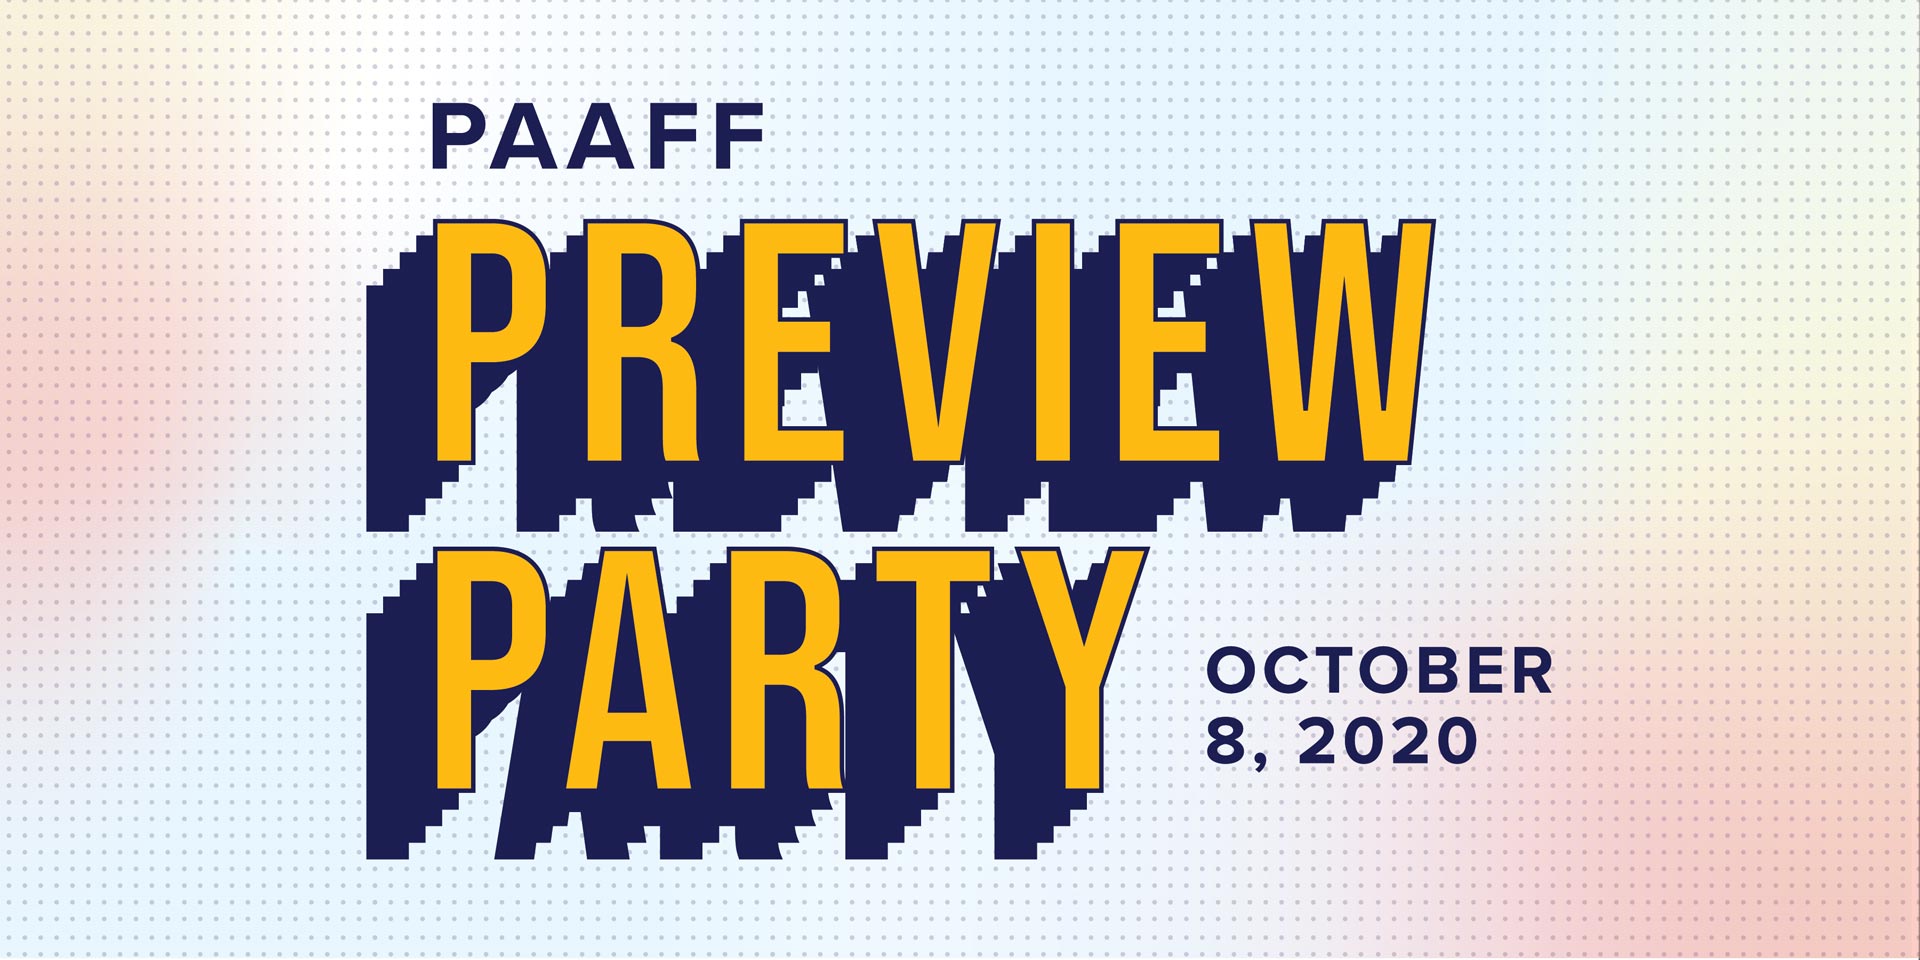 PAAFF 2020 Preview Party event graphic